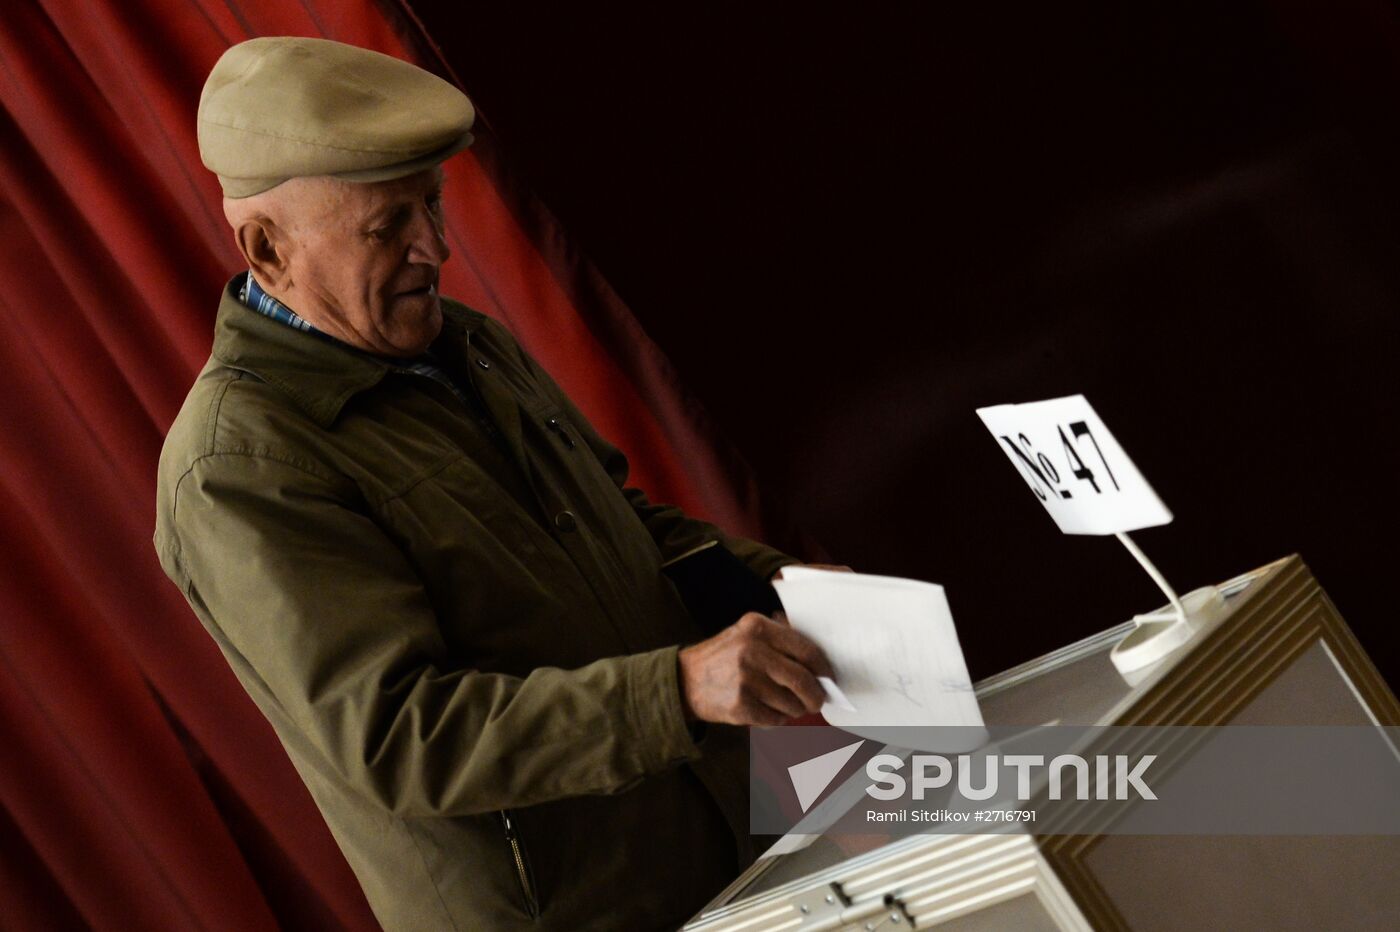 Belarusian presidential elections